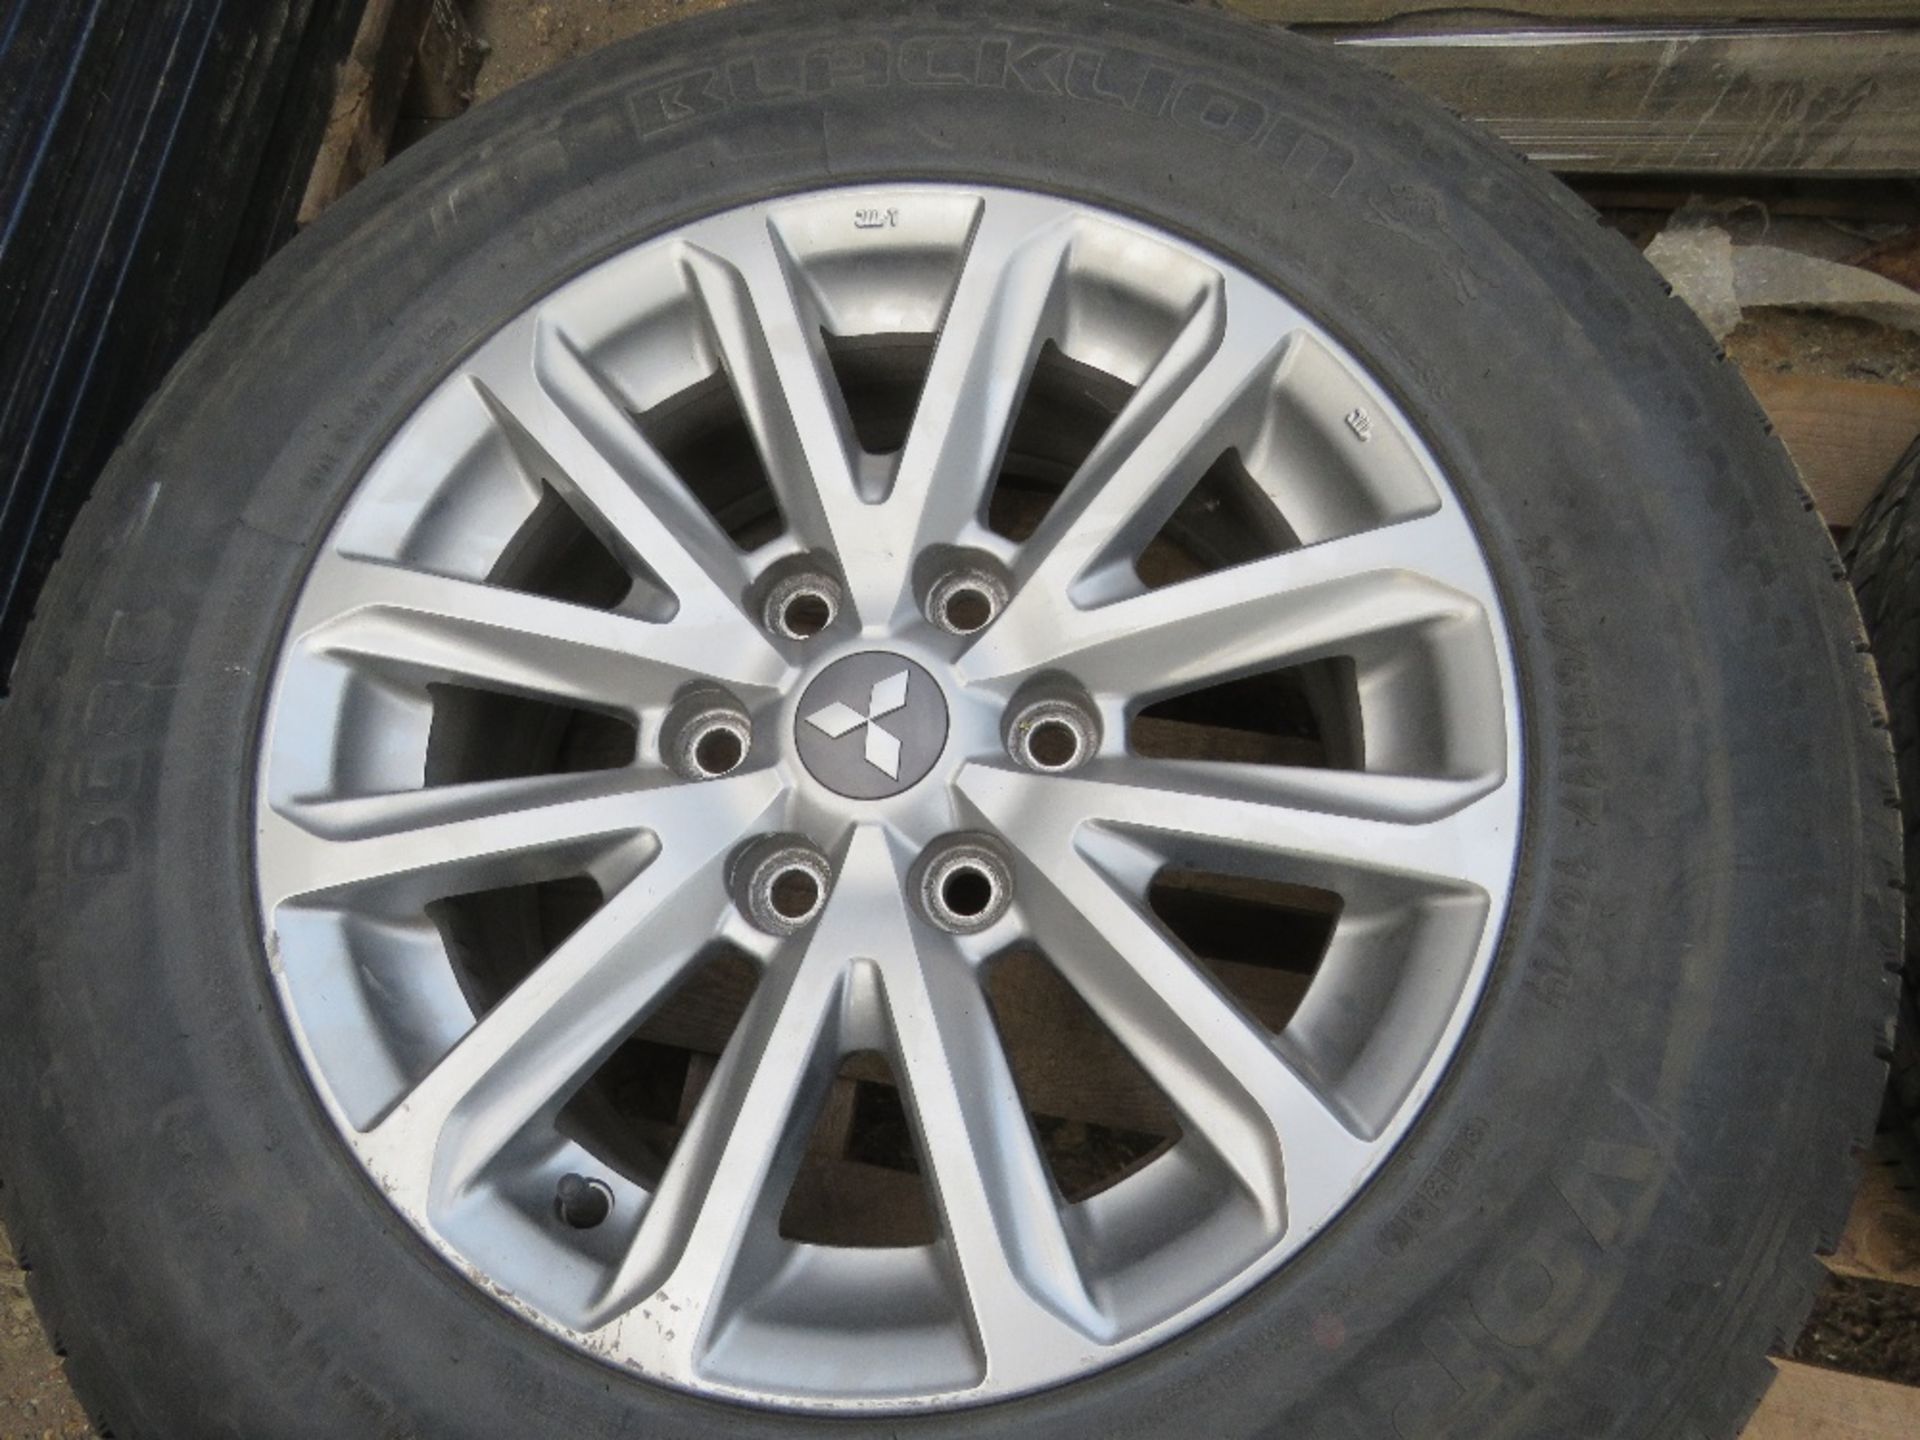 4NO MITSUBISHI 4WD ALLOY WHEELS AND TYRES 245/65R17 SIZE. THIS LOT IS SOLD UNDER THE AUCTIONEERS MAR - Image 8 of 8